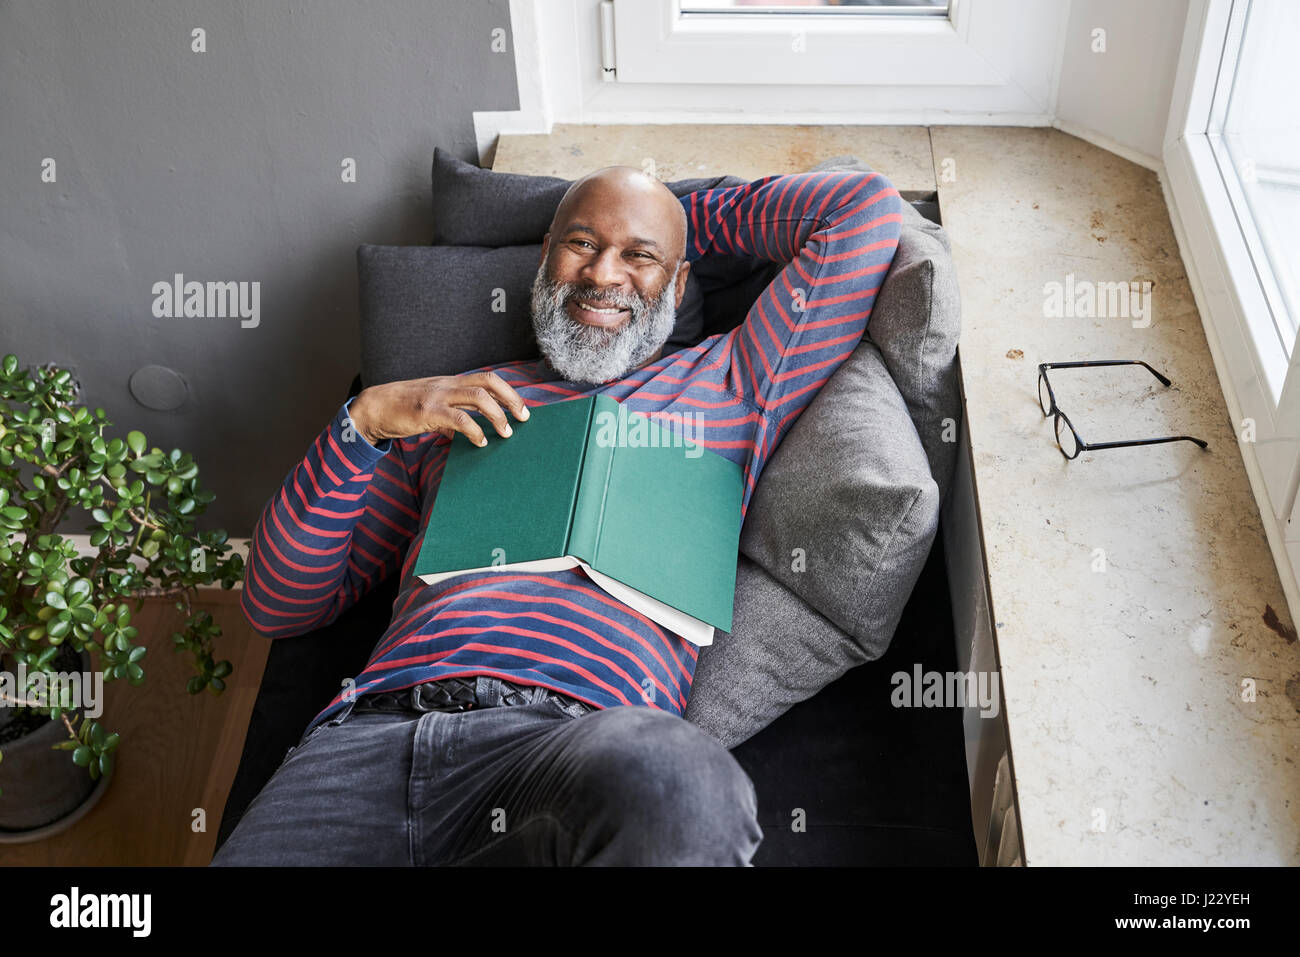 Matur man lying on bench with a book, smiling Stock Photo